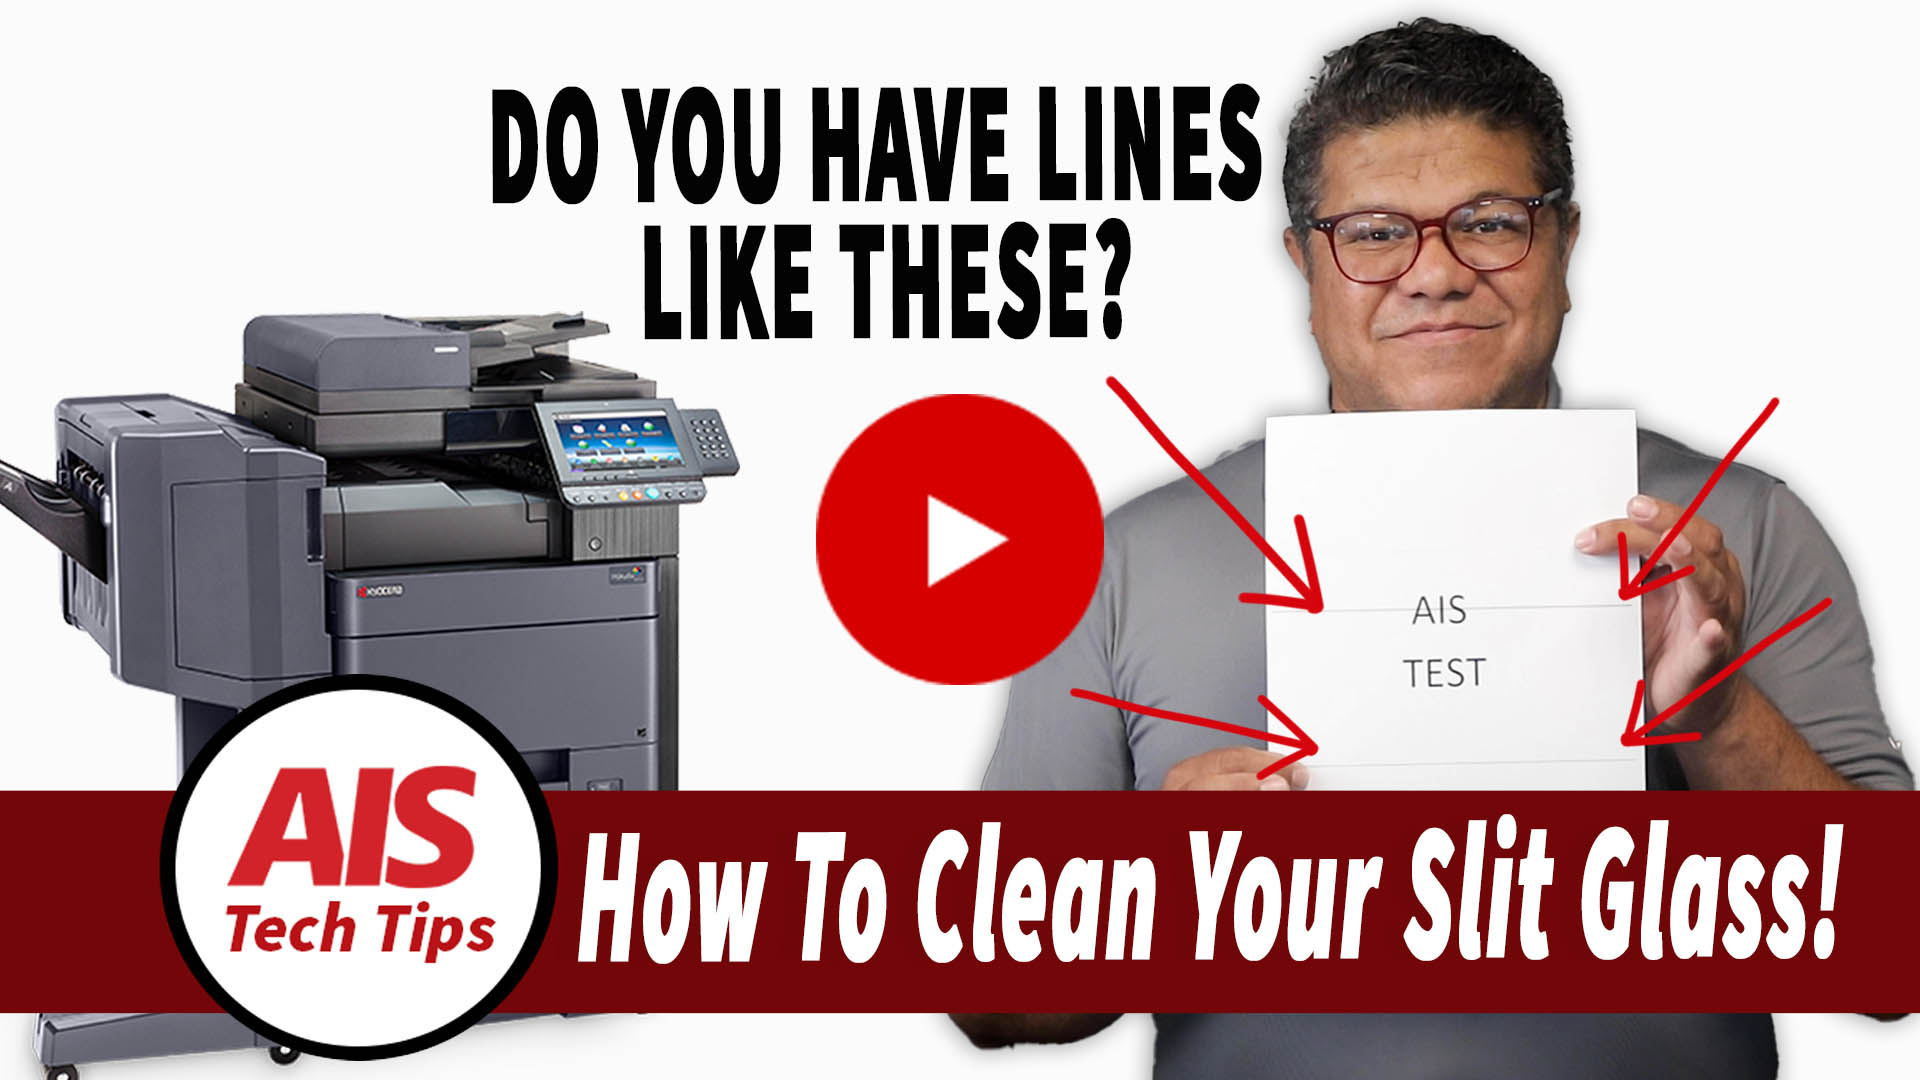 How To Clean Your Copier Slit Glass